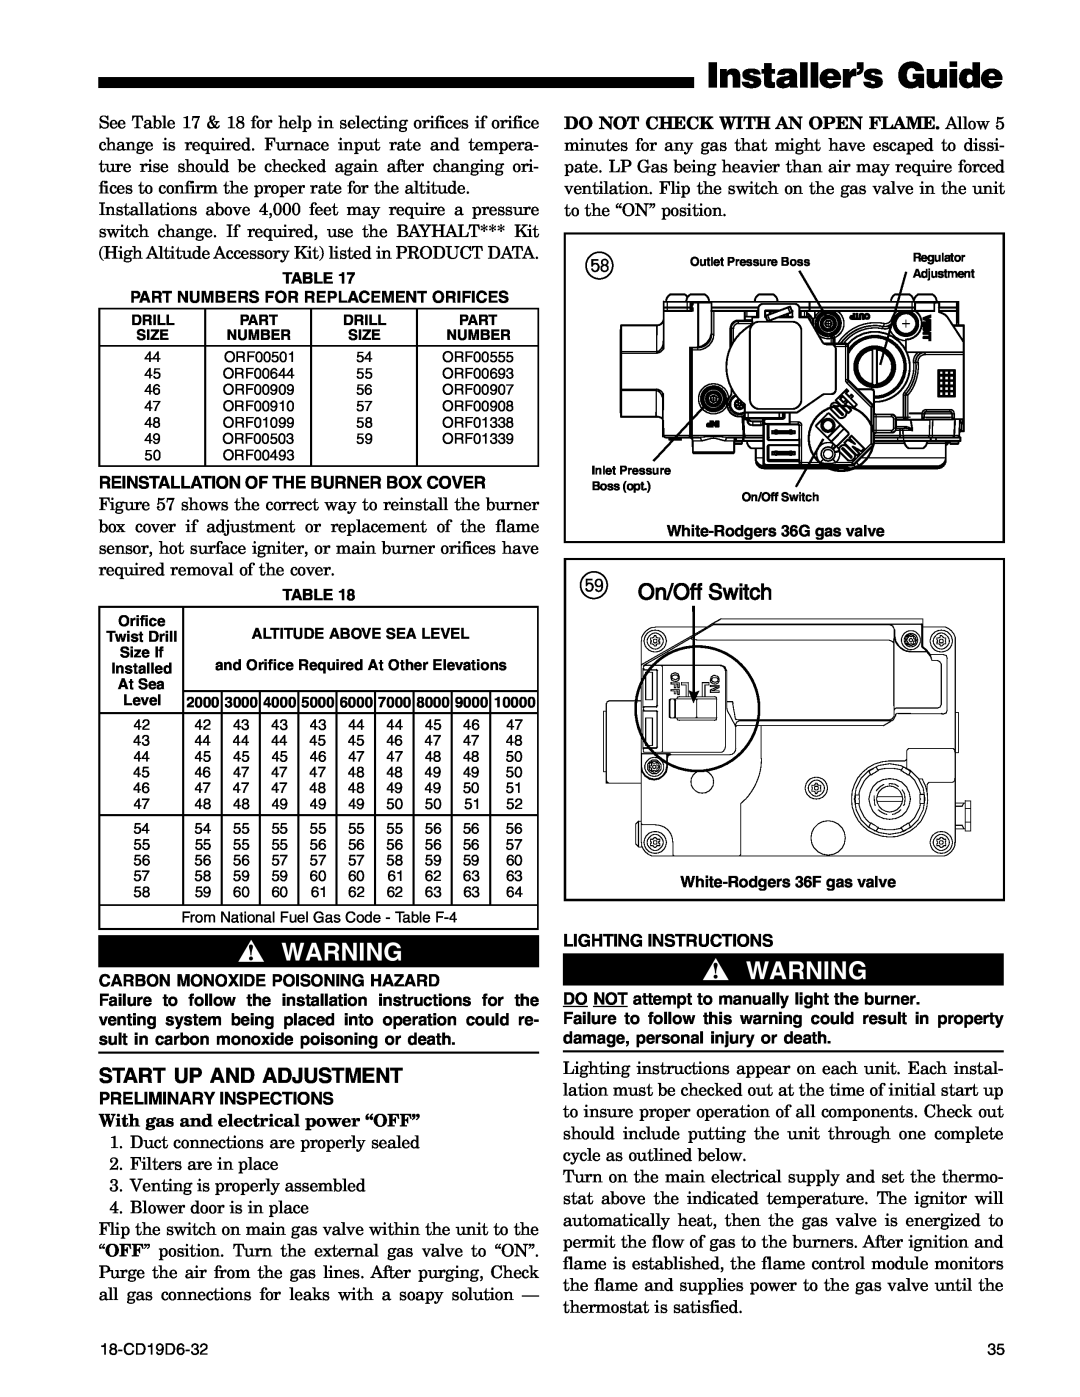 Trane UX1B060A9361A manual Installer’s Guide, Reinstallation Of The Burner Box Cover, Carbon Monoxide Poisoning Hazard 